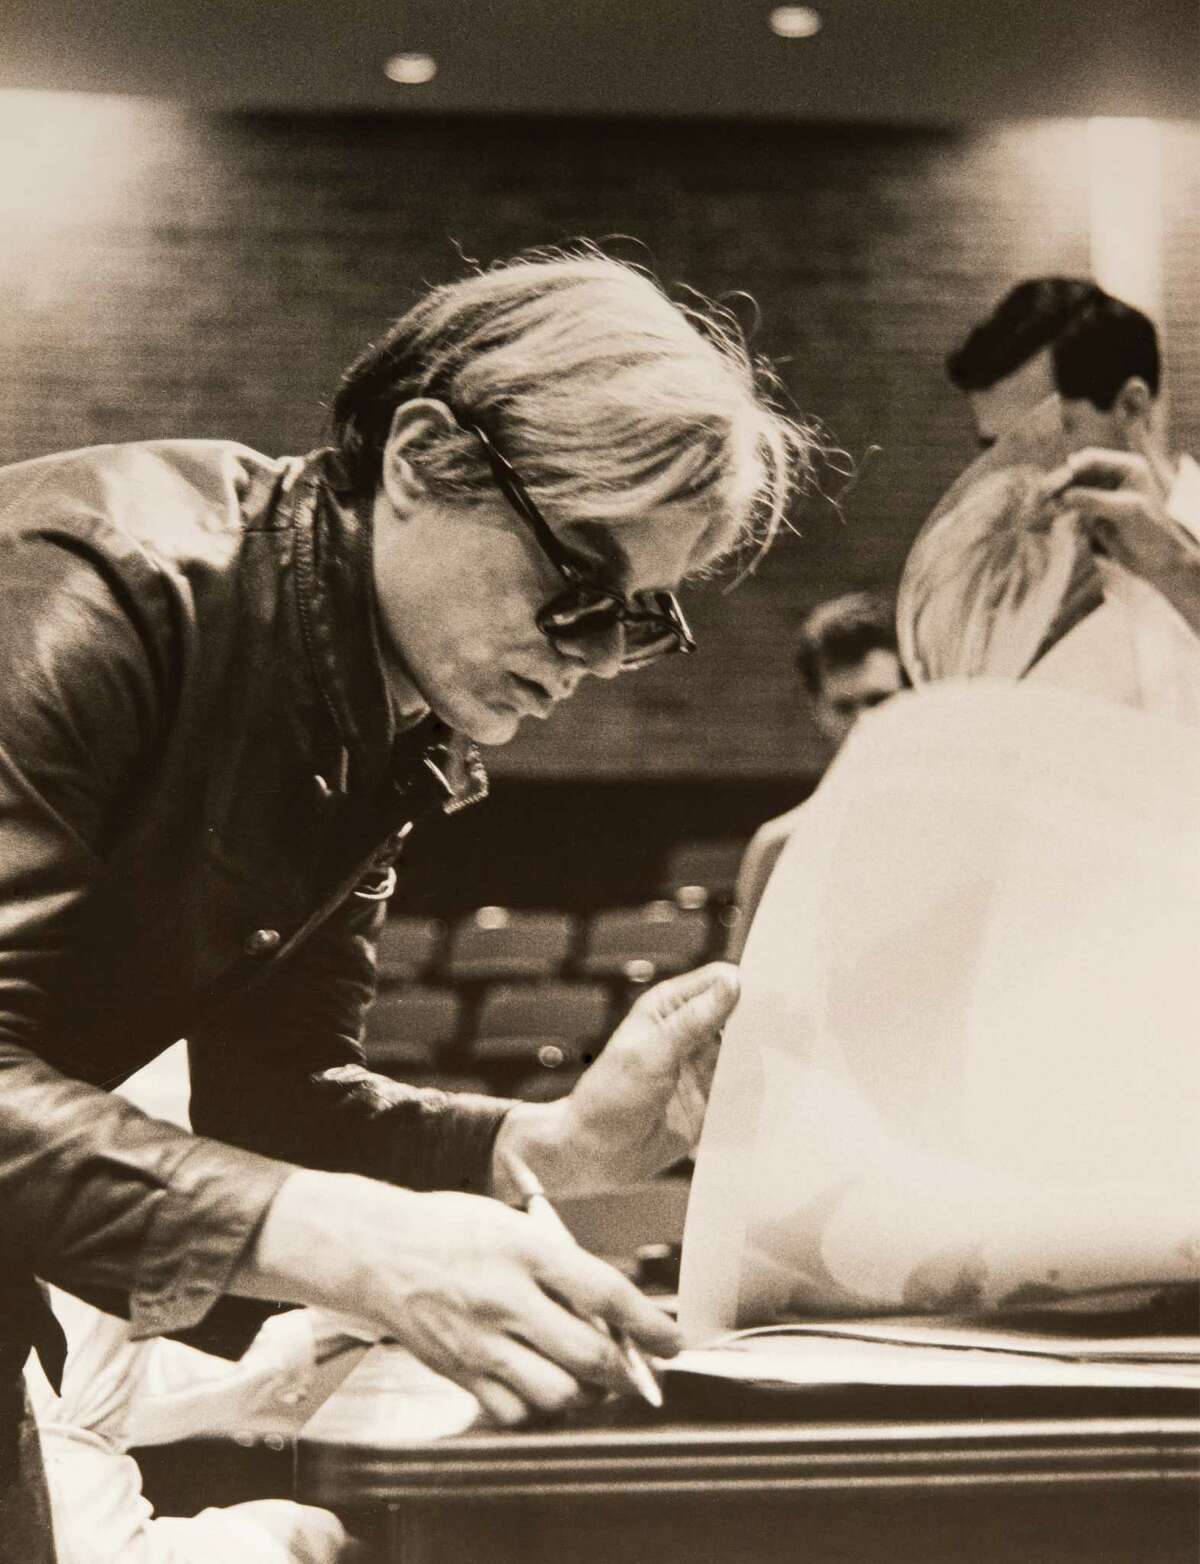 Andy Warhol signing posters, University of St. Thomas, Houston, 1968.